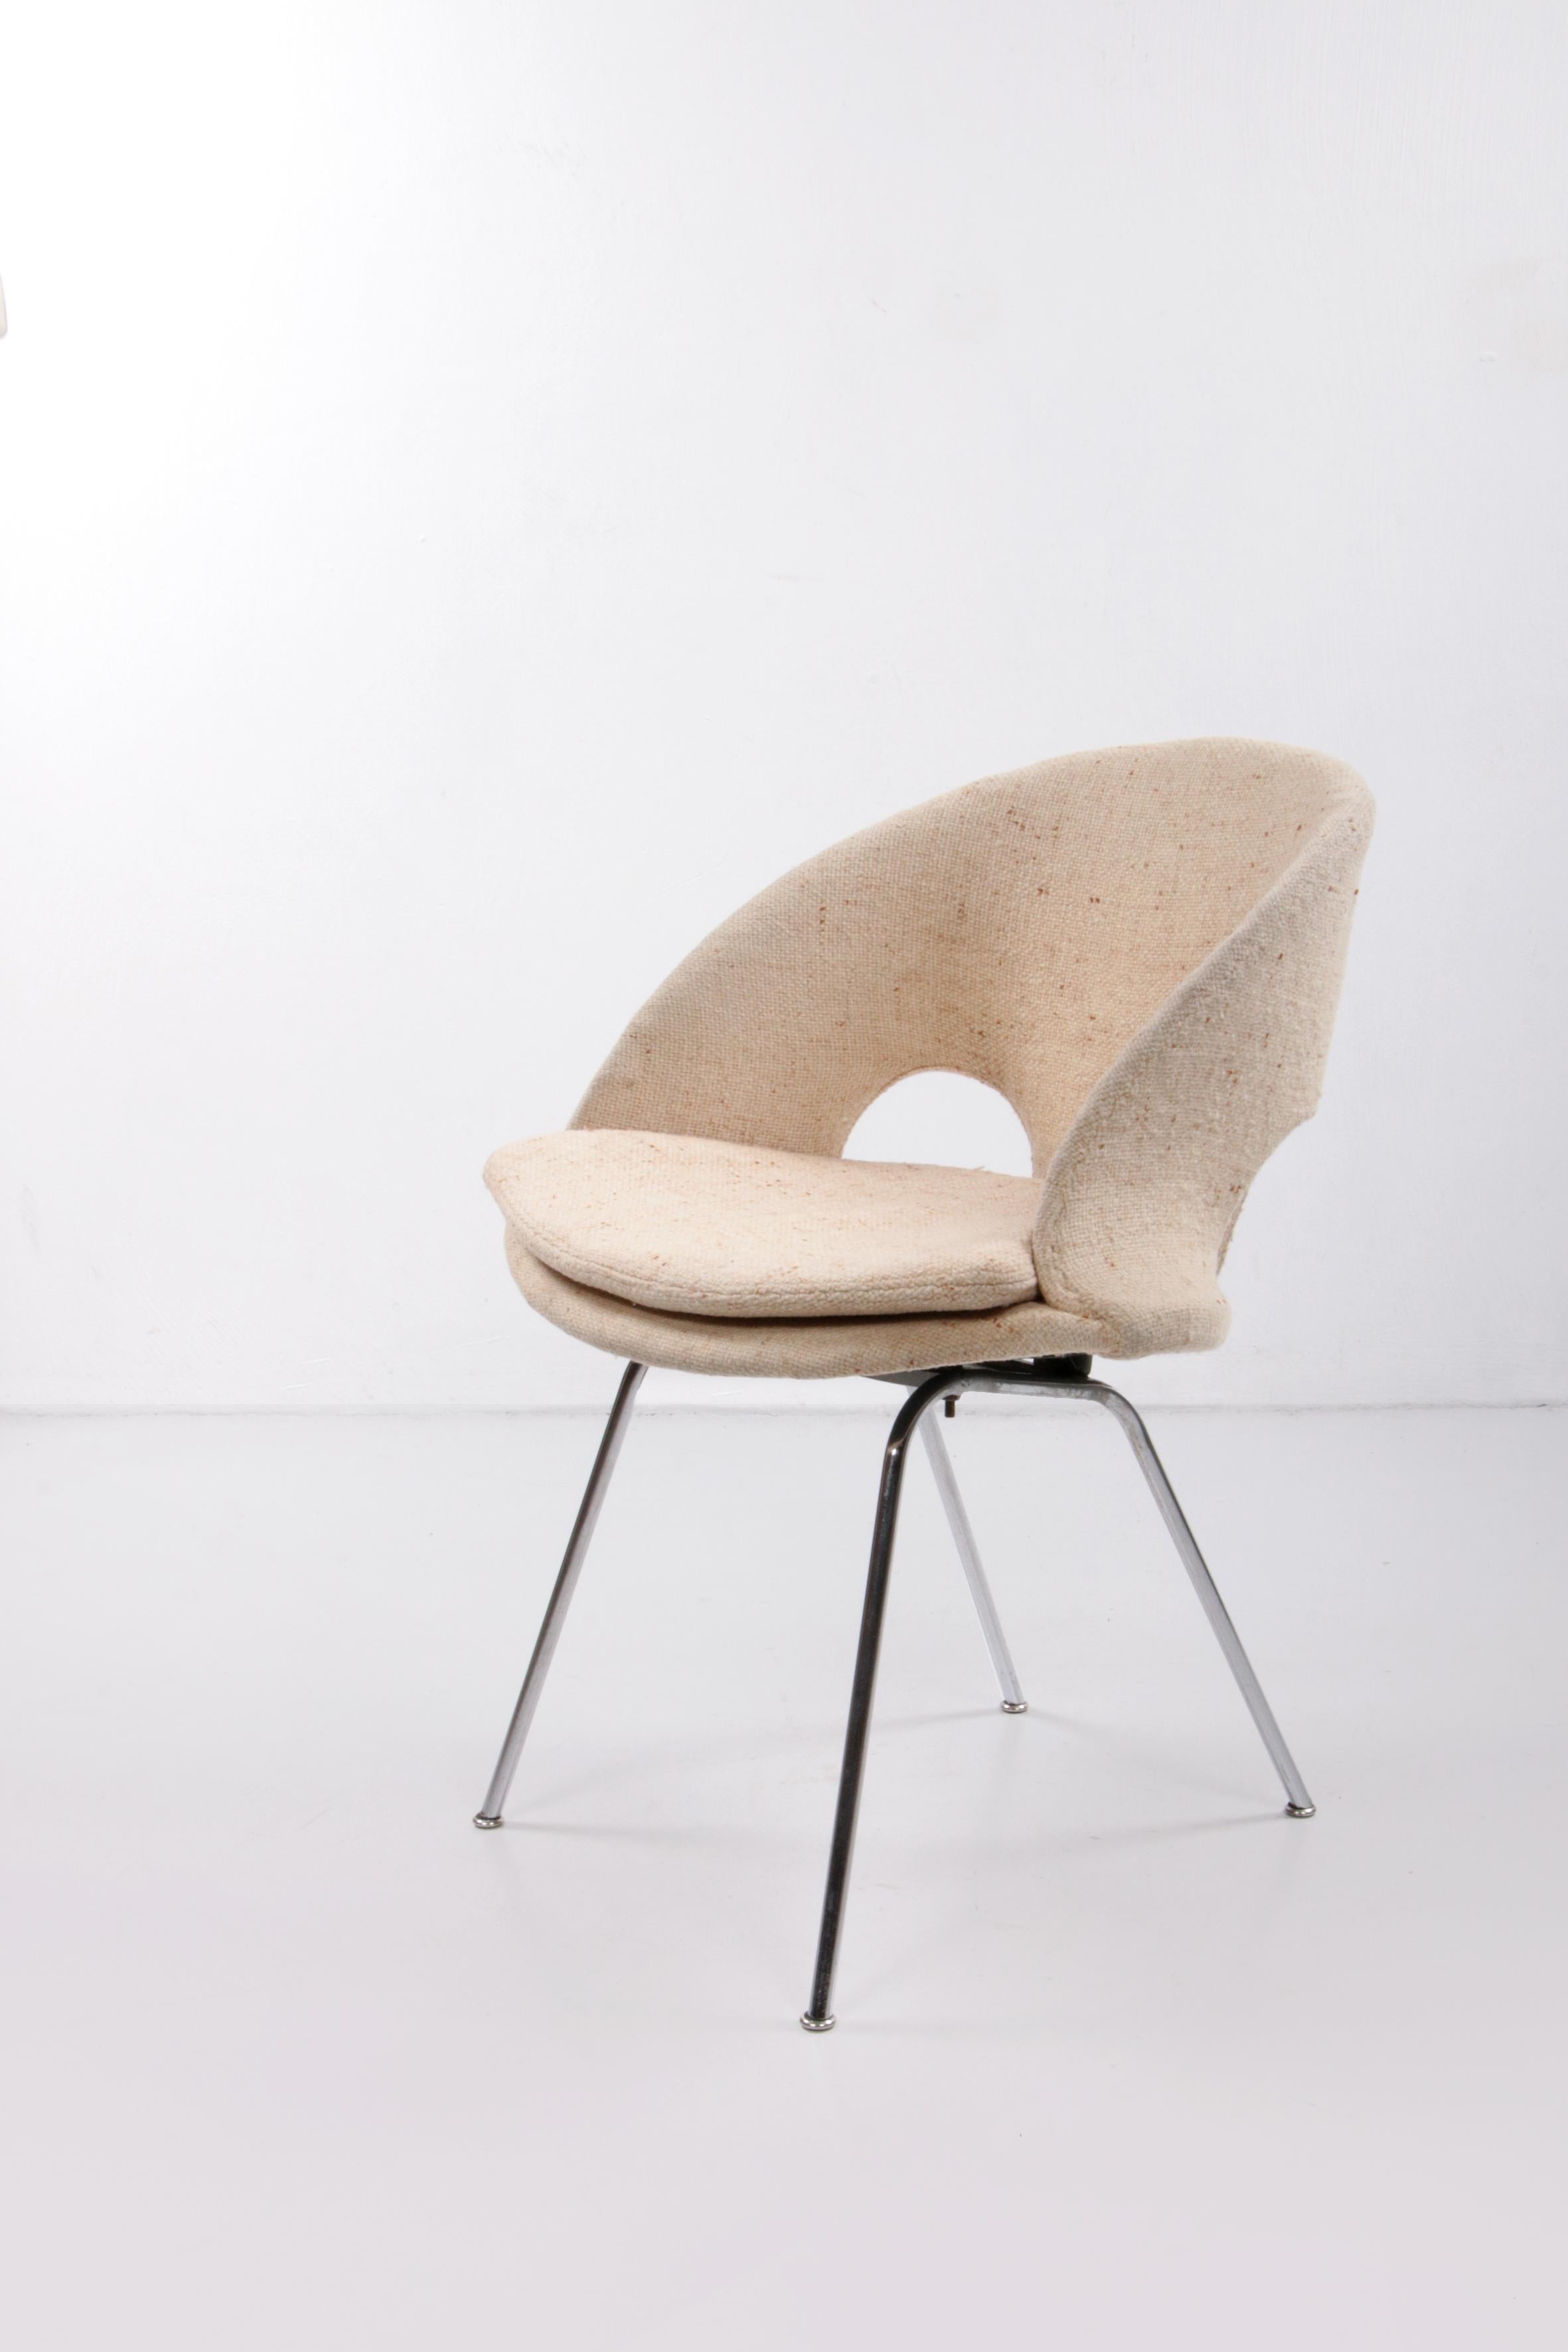 Walter Knoll Lounge Chair by Arno Votteler Model 350, 1950s For Sale 9